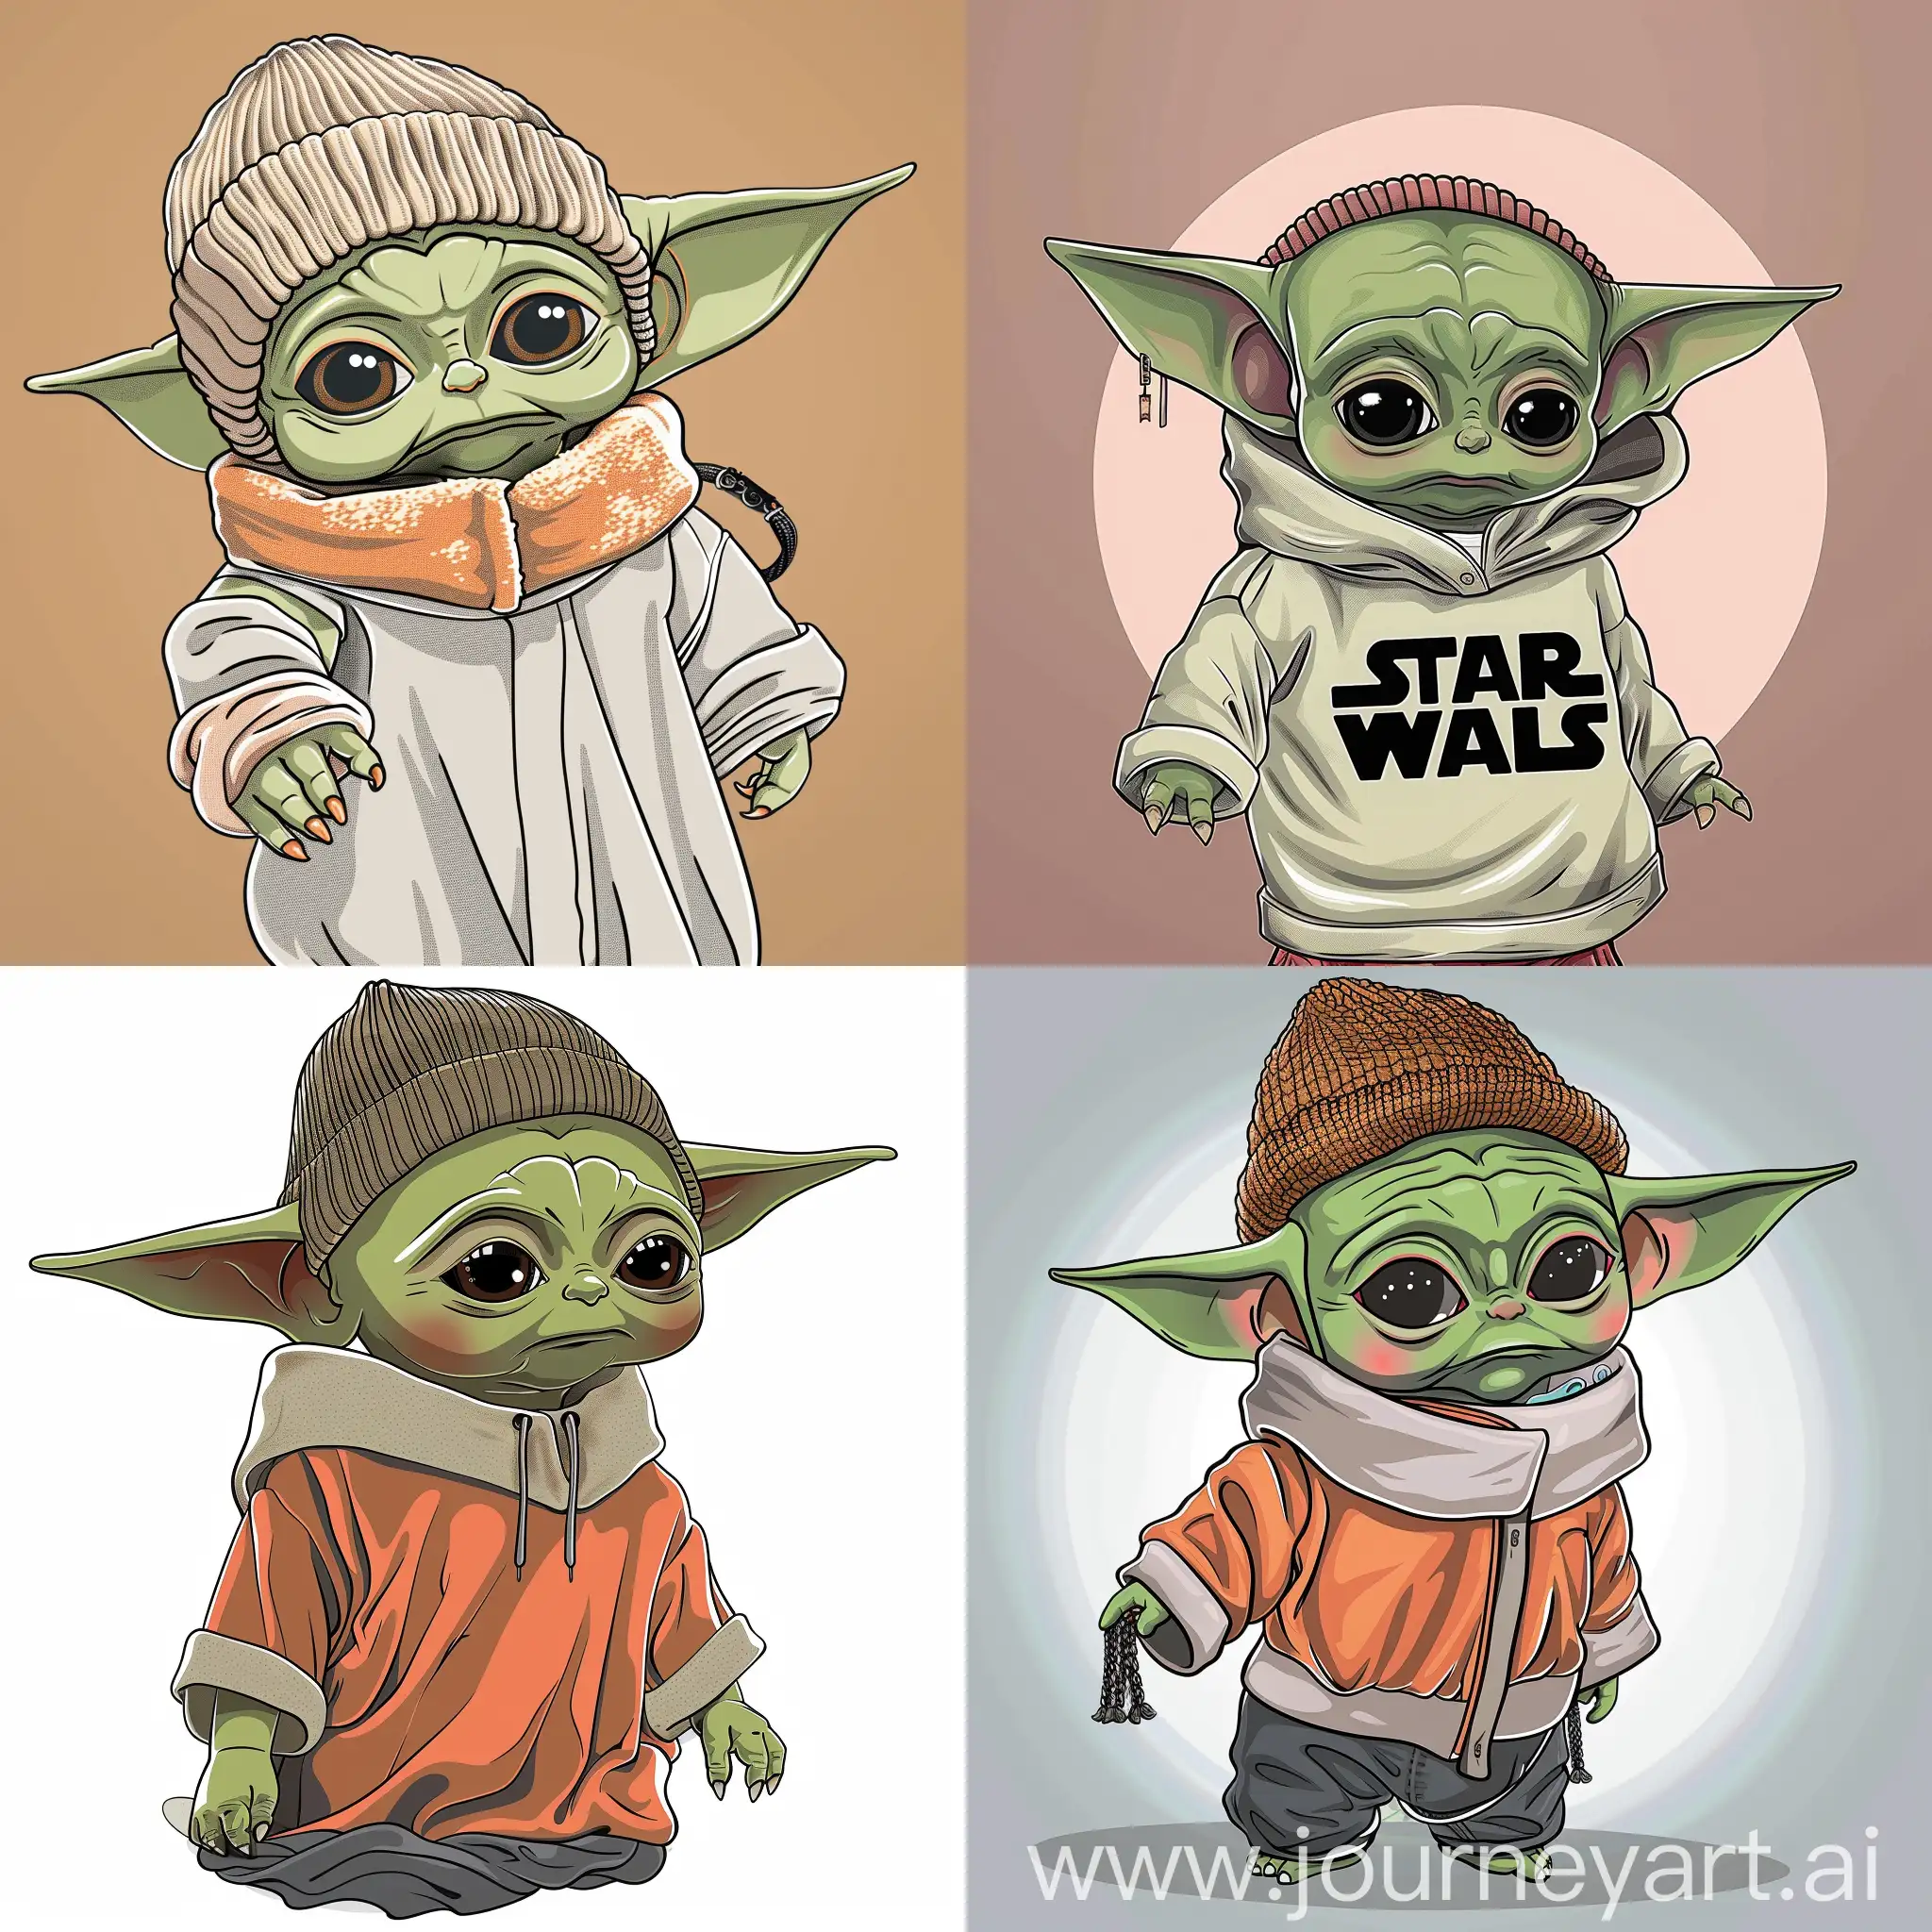 a cartoon of Baby Yoda wearing a t - shirt and a beanie, dope, most dope, 2 d style, 2 d anime style, hiphop, cartoon art style, thug life, nipsey hussle, hip hop aesthetic, hip hop style, mcbess, anime style”, rap bling, lol style, gorillaz style, crips, hip hop

Variation number 1